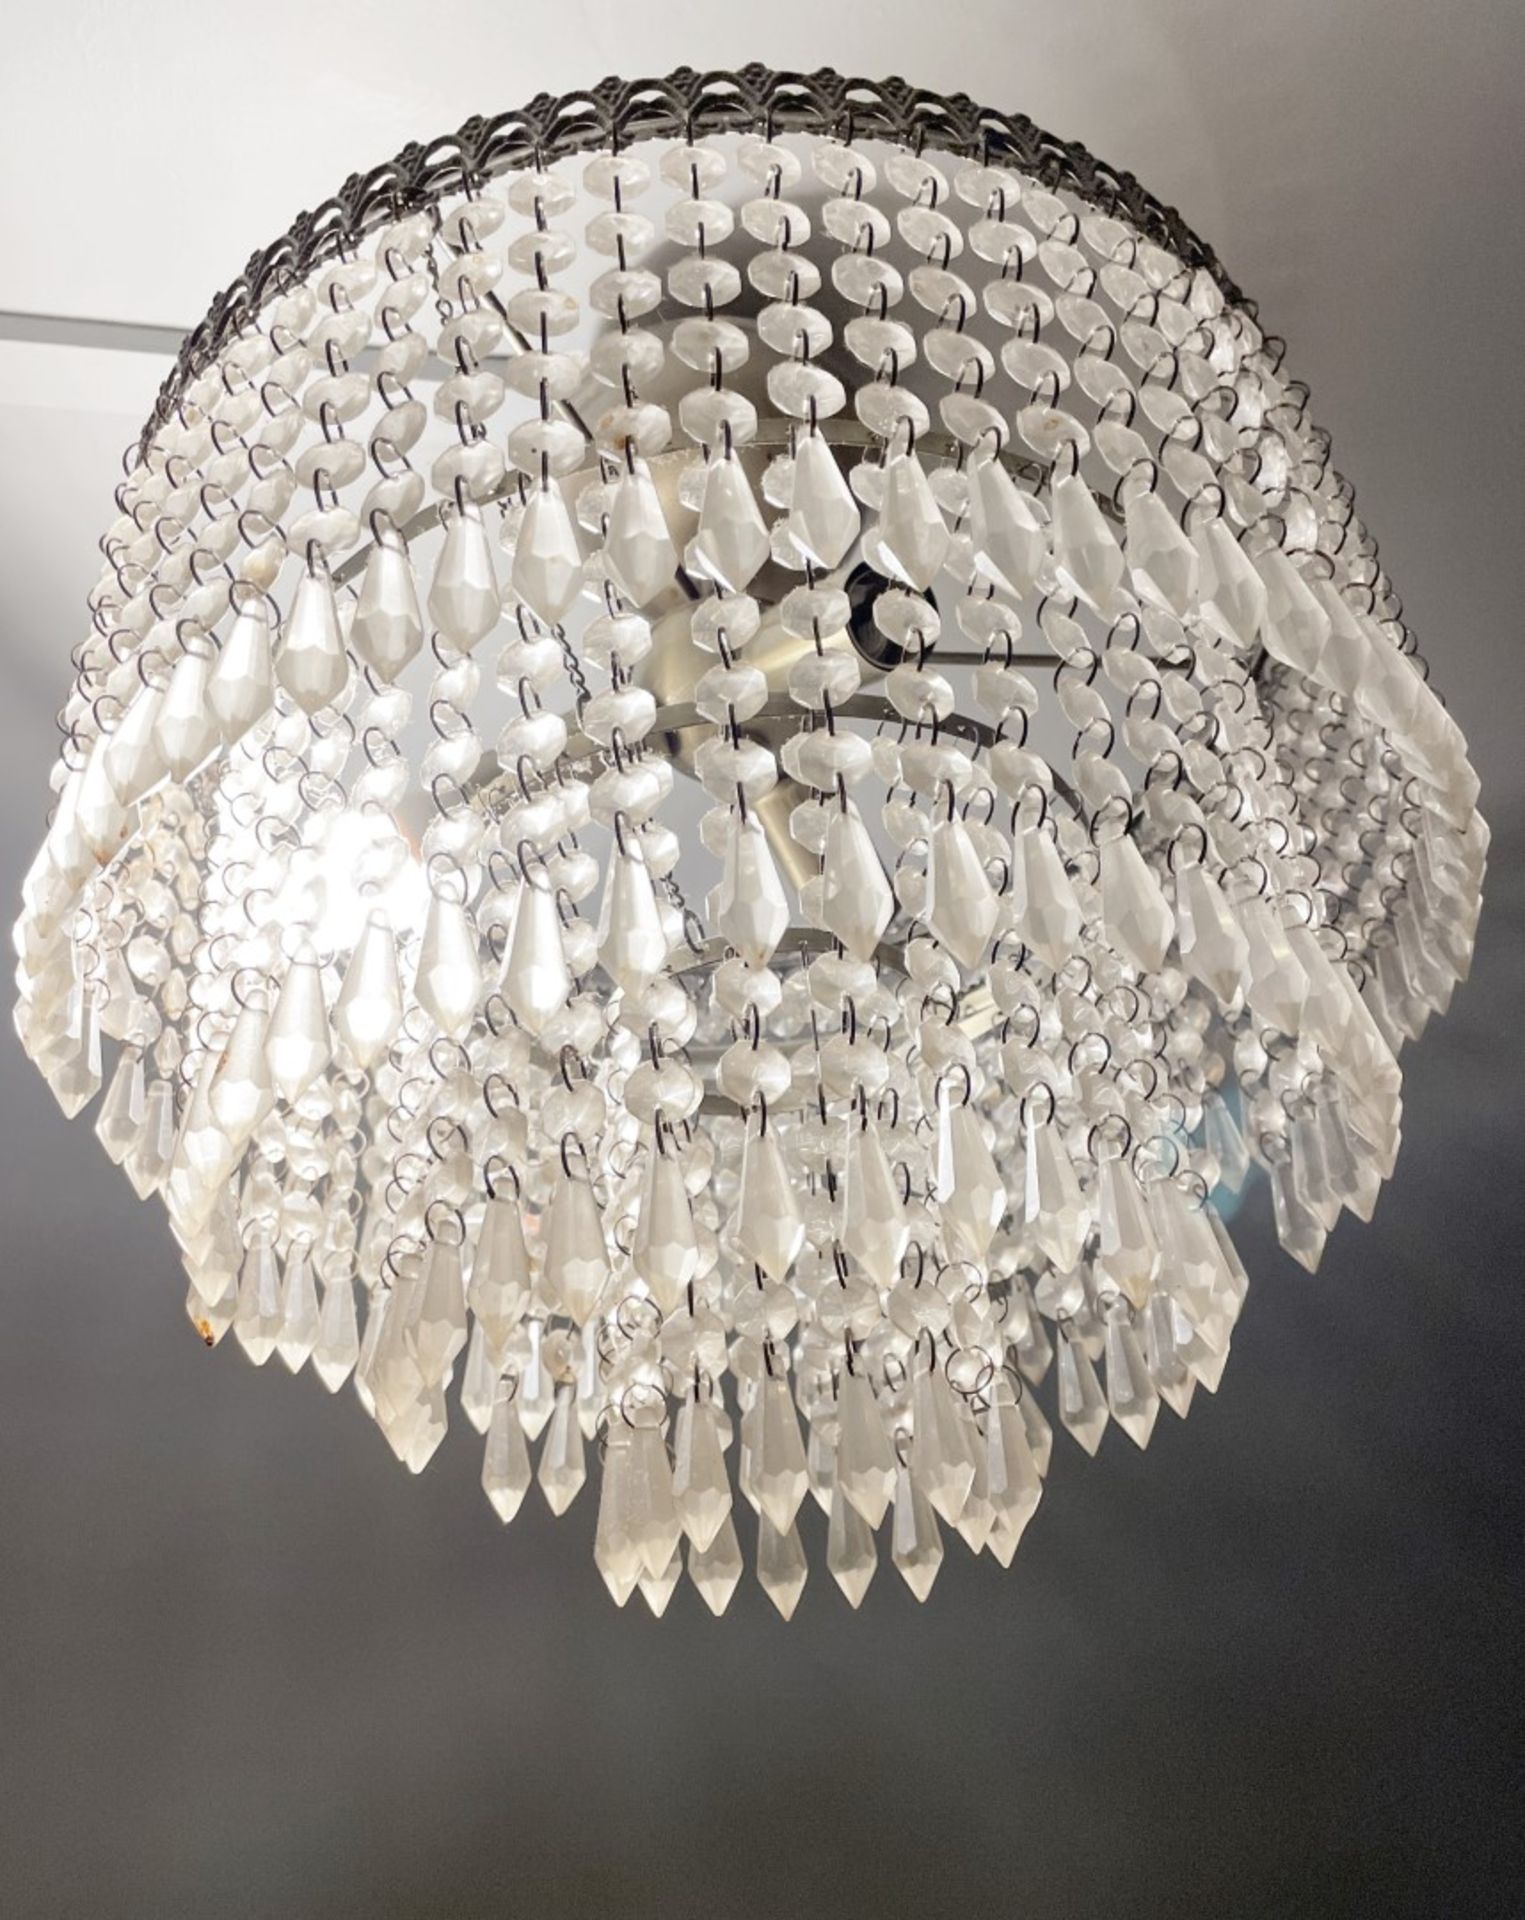 1 x Vintage Ceiling Pendant Chandelier Light Fitting Adorned with 4-Tiers of Glass - Image 4 of 5